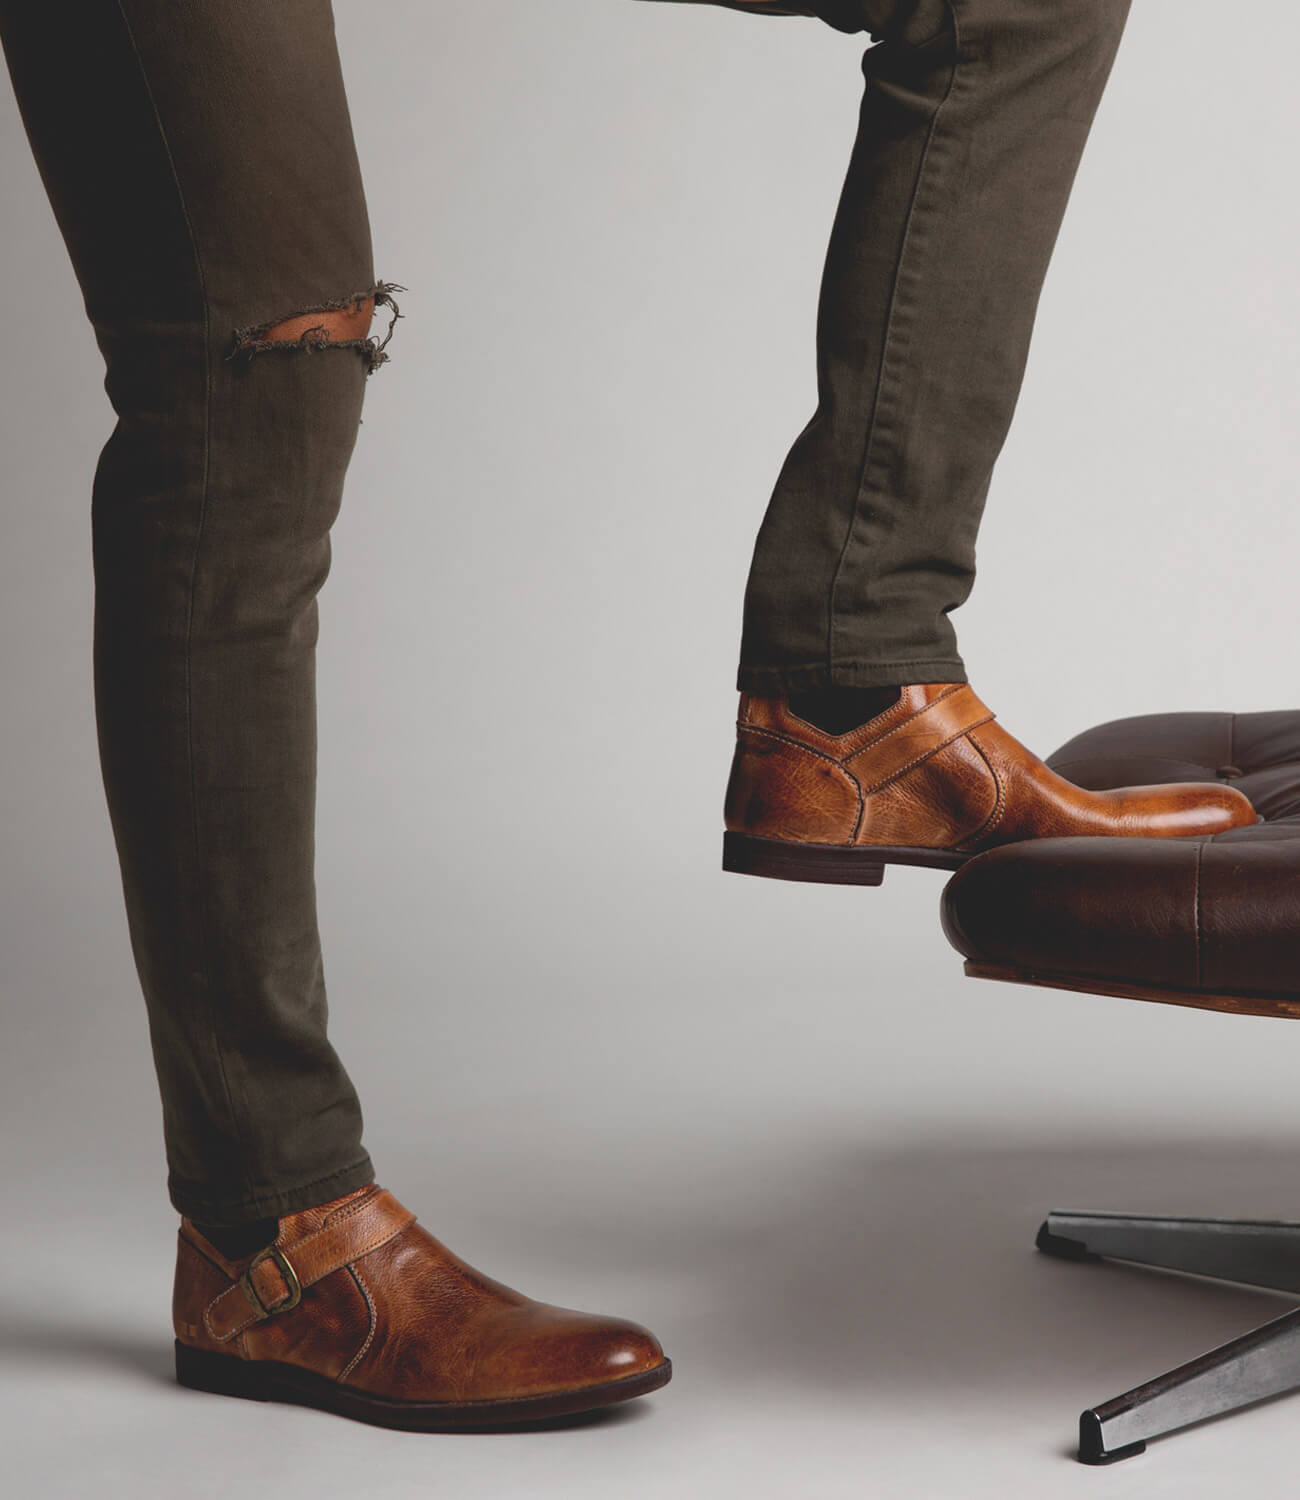 A man standing on a chair wearing Bed Stu Michelangelo brown leather shoes.